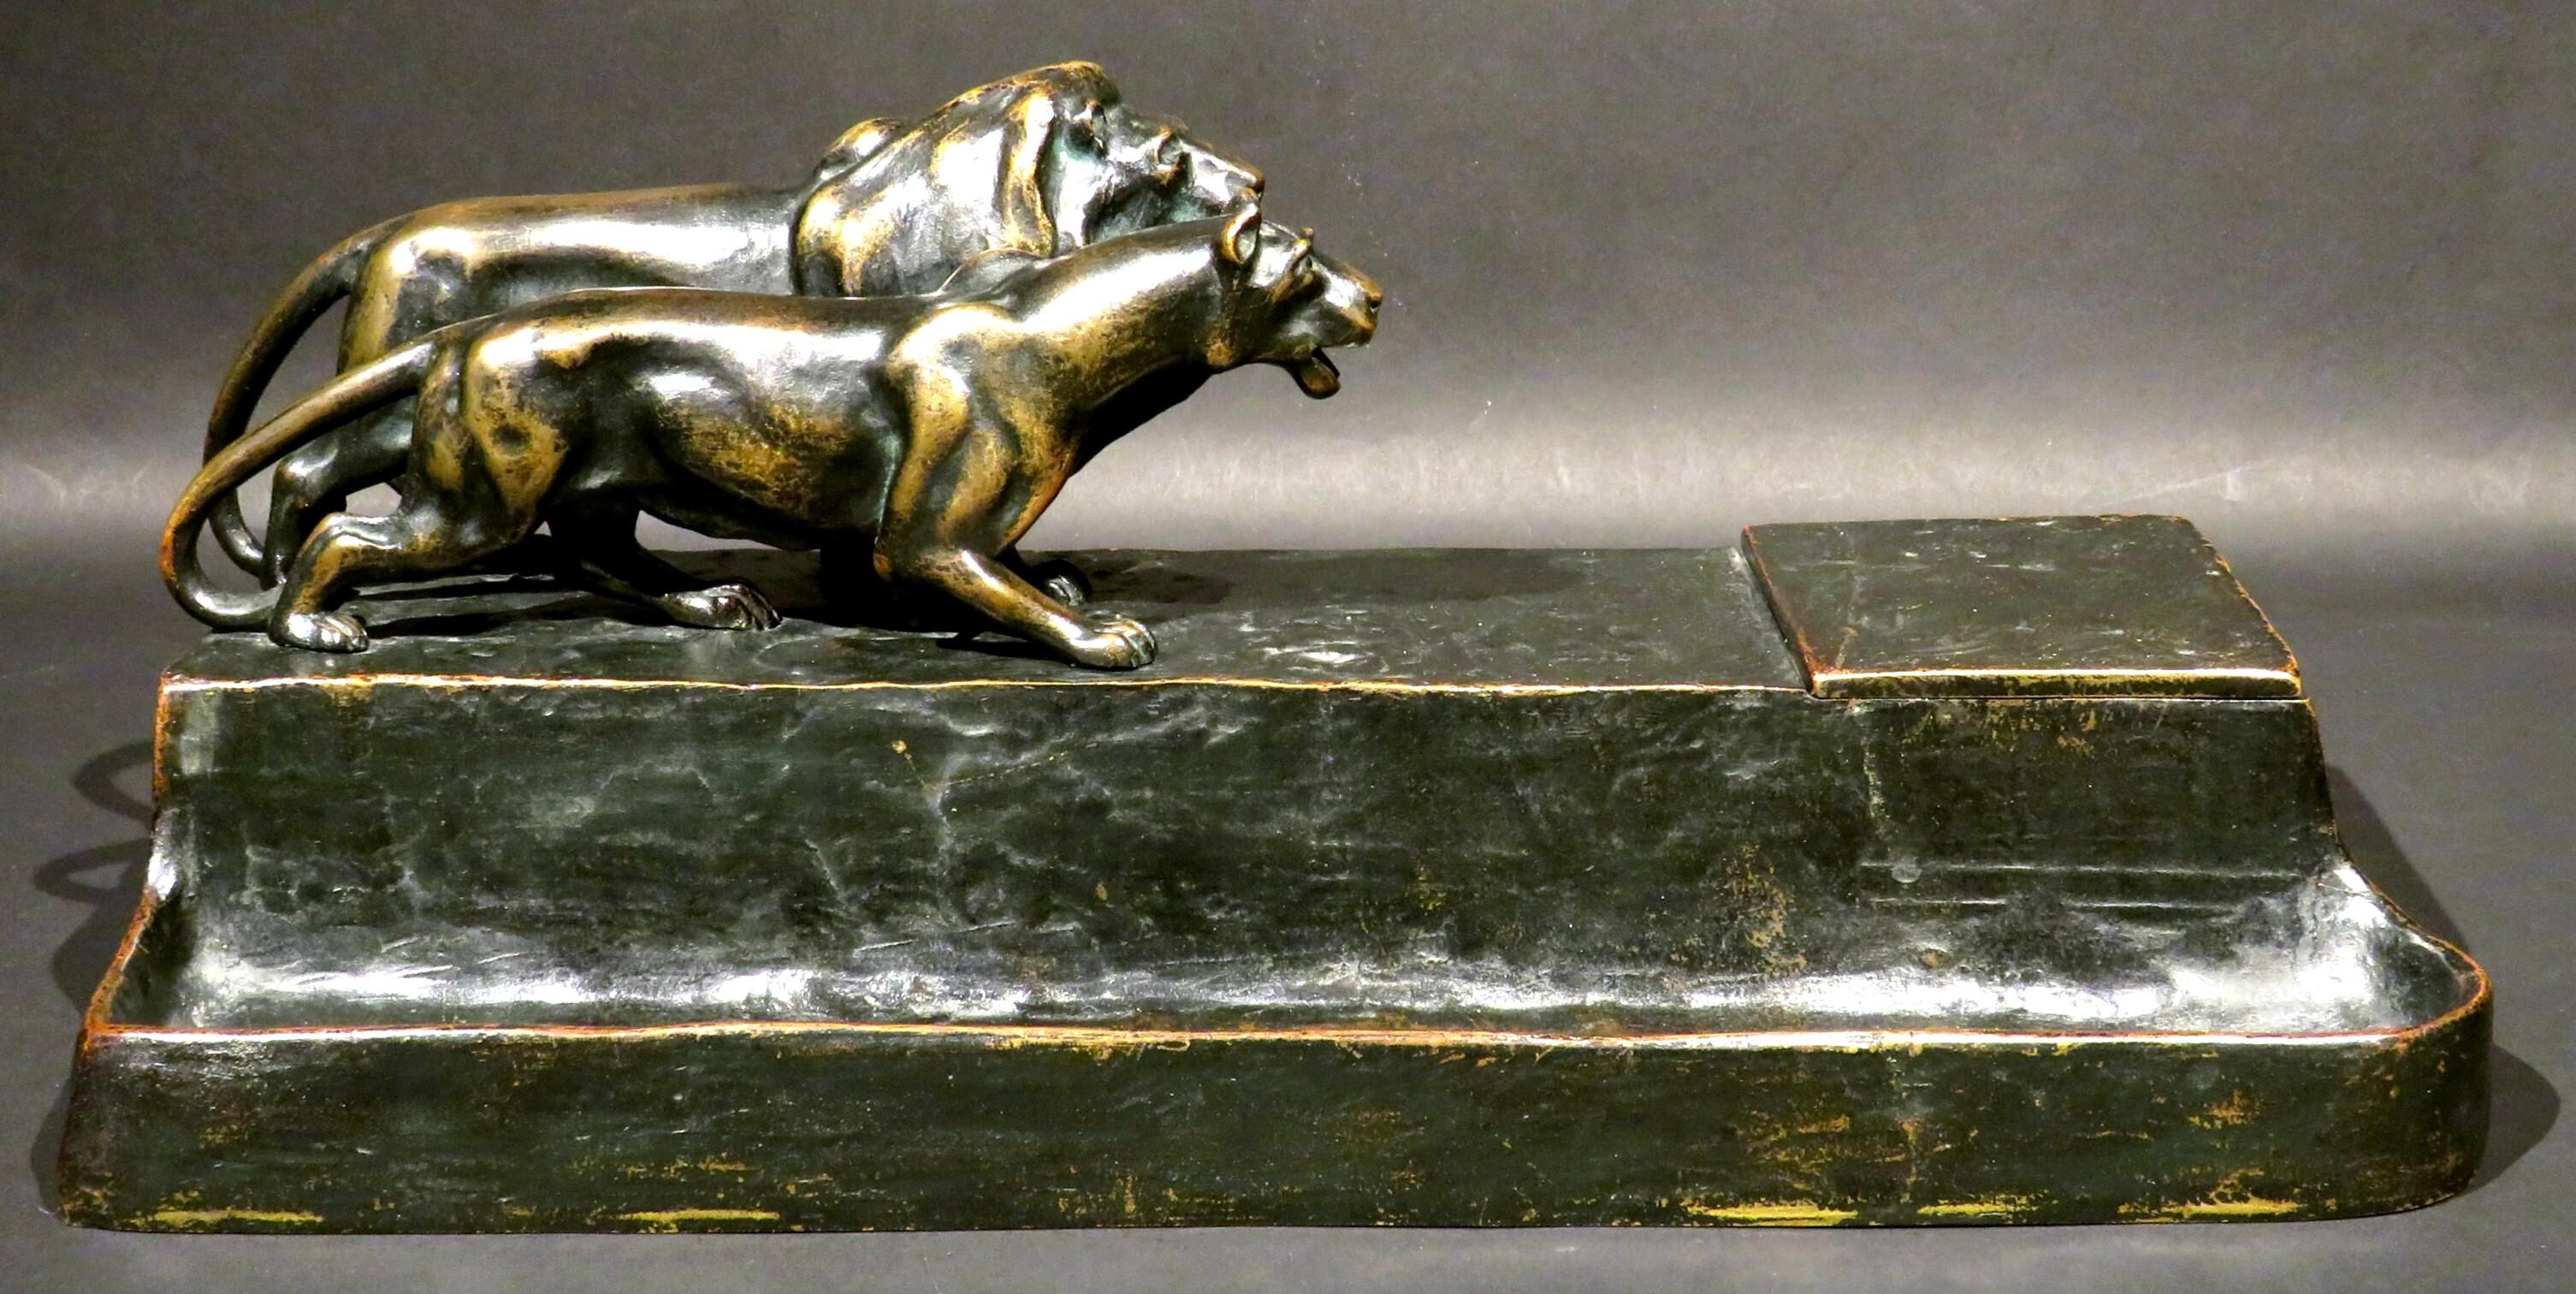 A very handsome early 20th century figural bronze inkstand depicting the finely modelled figures of a lion & lioness striding across a naturalistic ground, both figures demonstrating fine muscular detail & movement. 
Positioned far right is a hinged